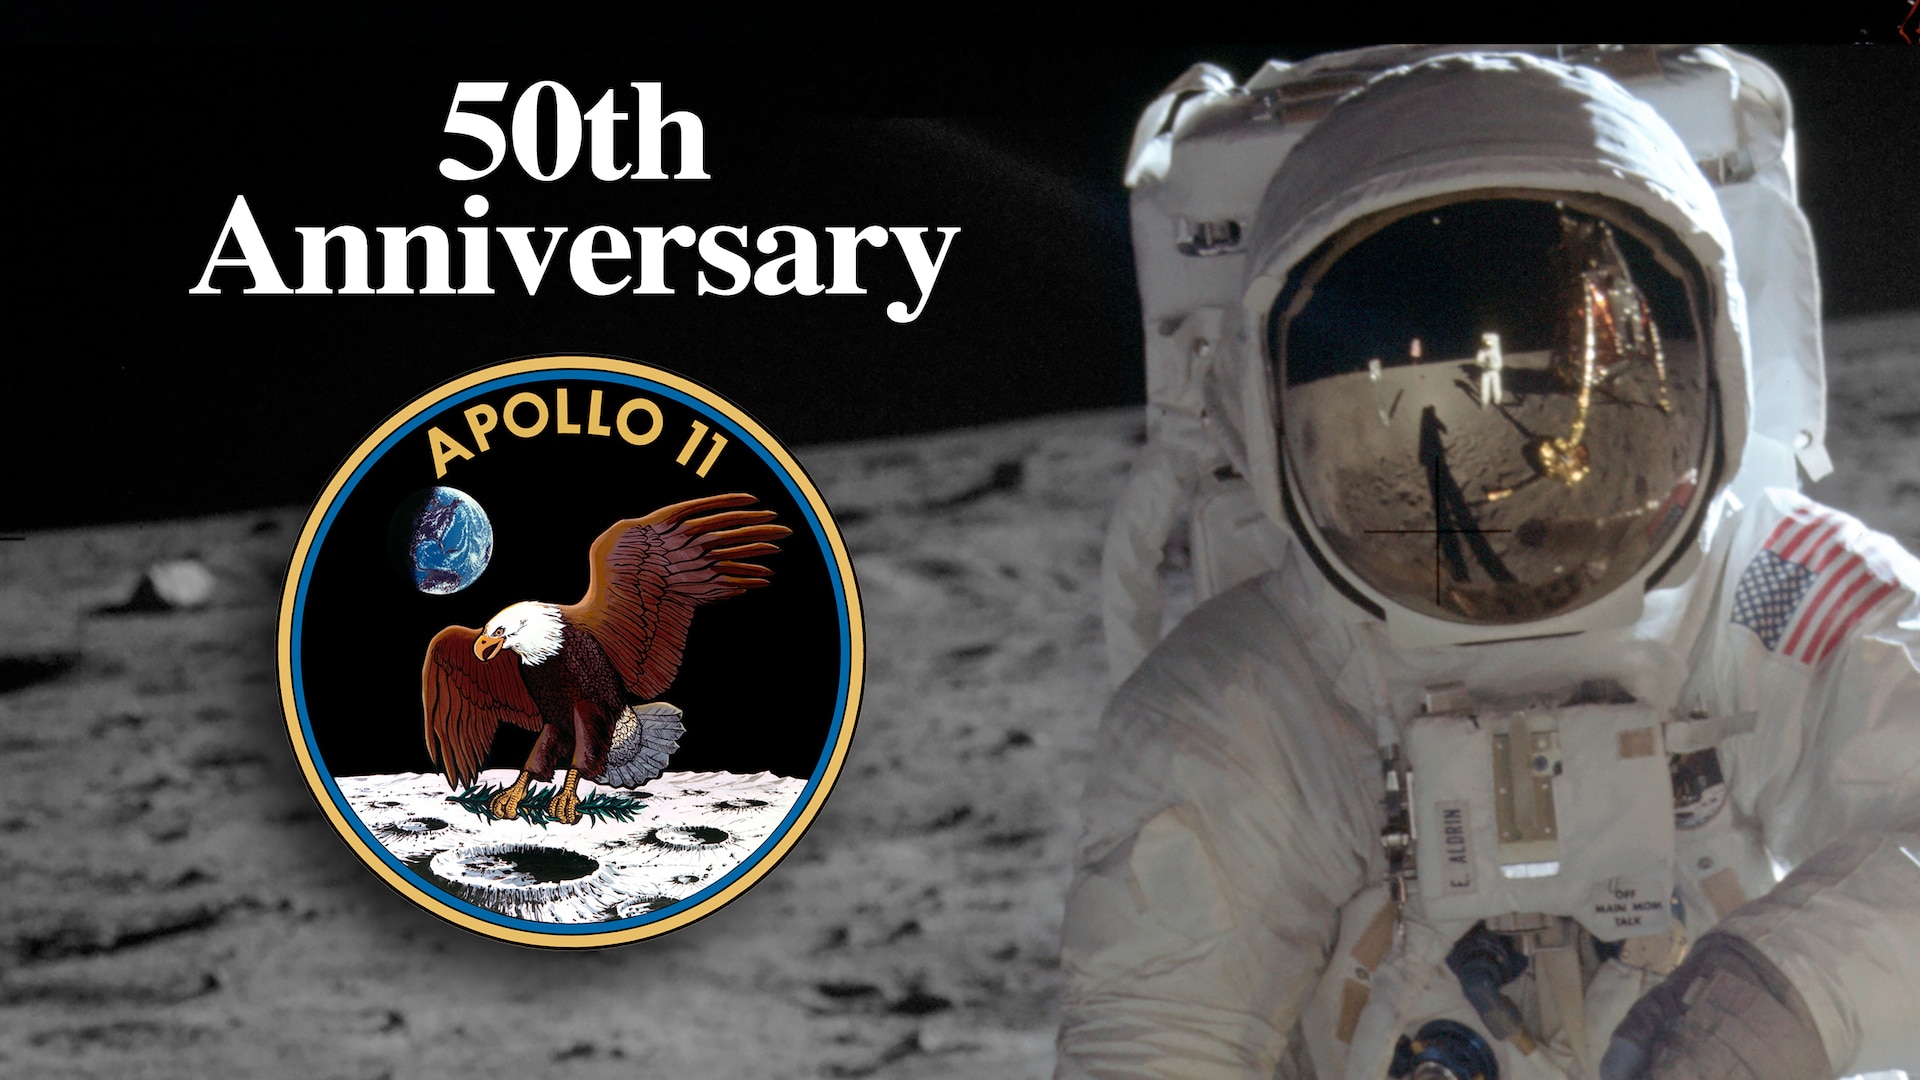 Astronaut Buzz Aldrin stands on the surface of the moon with the leg of the lunar module reflected in his visor. An Apollo II emblem is accompanied by the text 50th Anniversary.